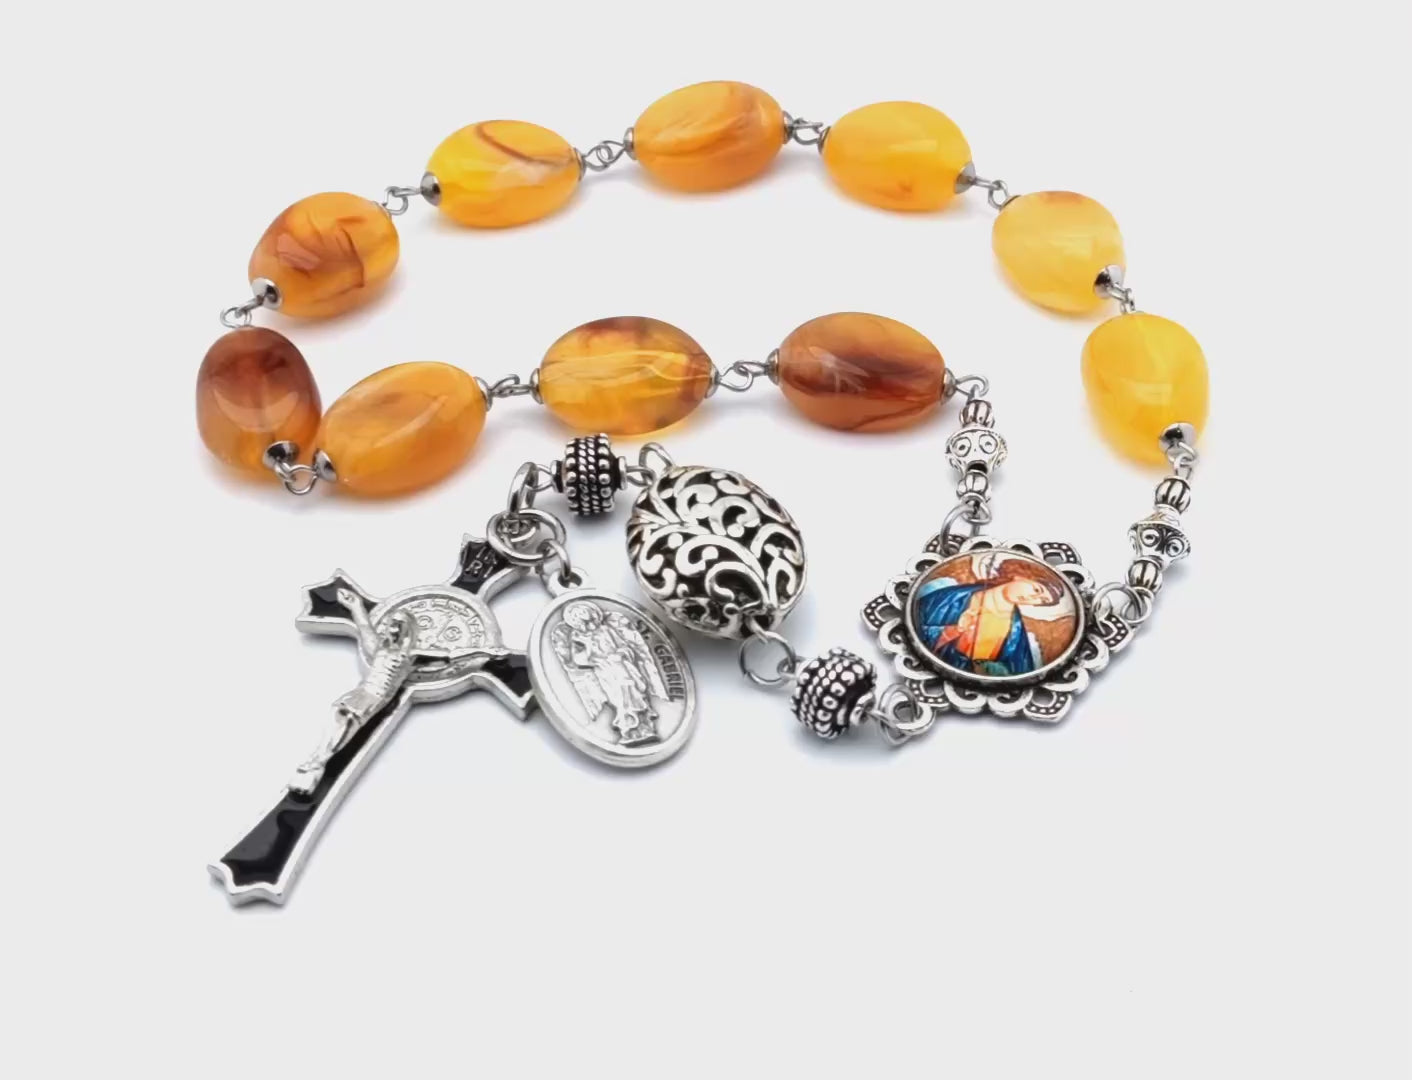 Saint Gabriel unique rosary beads single decade rosary with amber gemstone beads, silver and black enamel crucifix and picture centre medal.